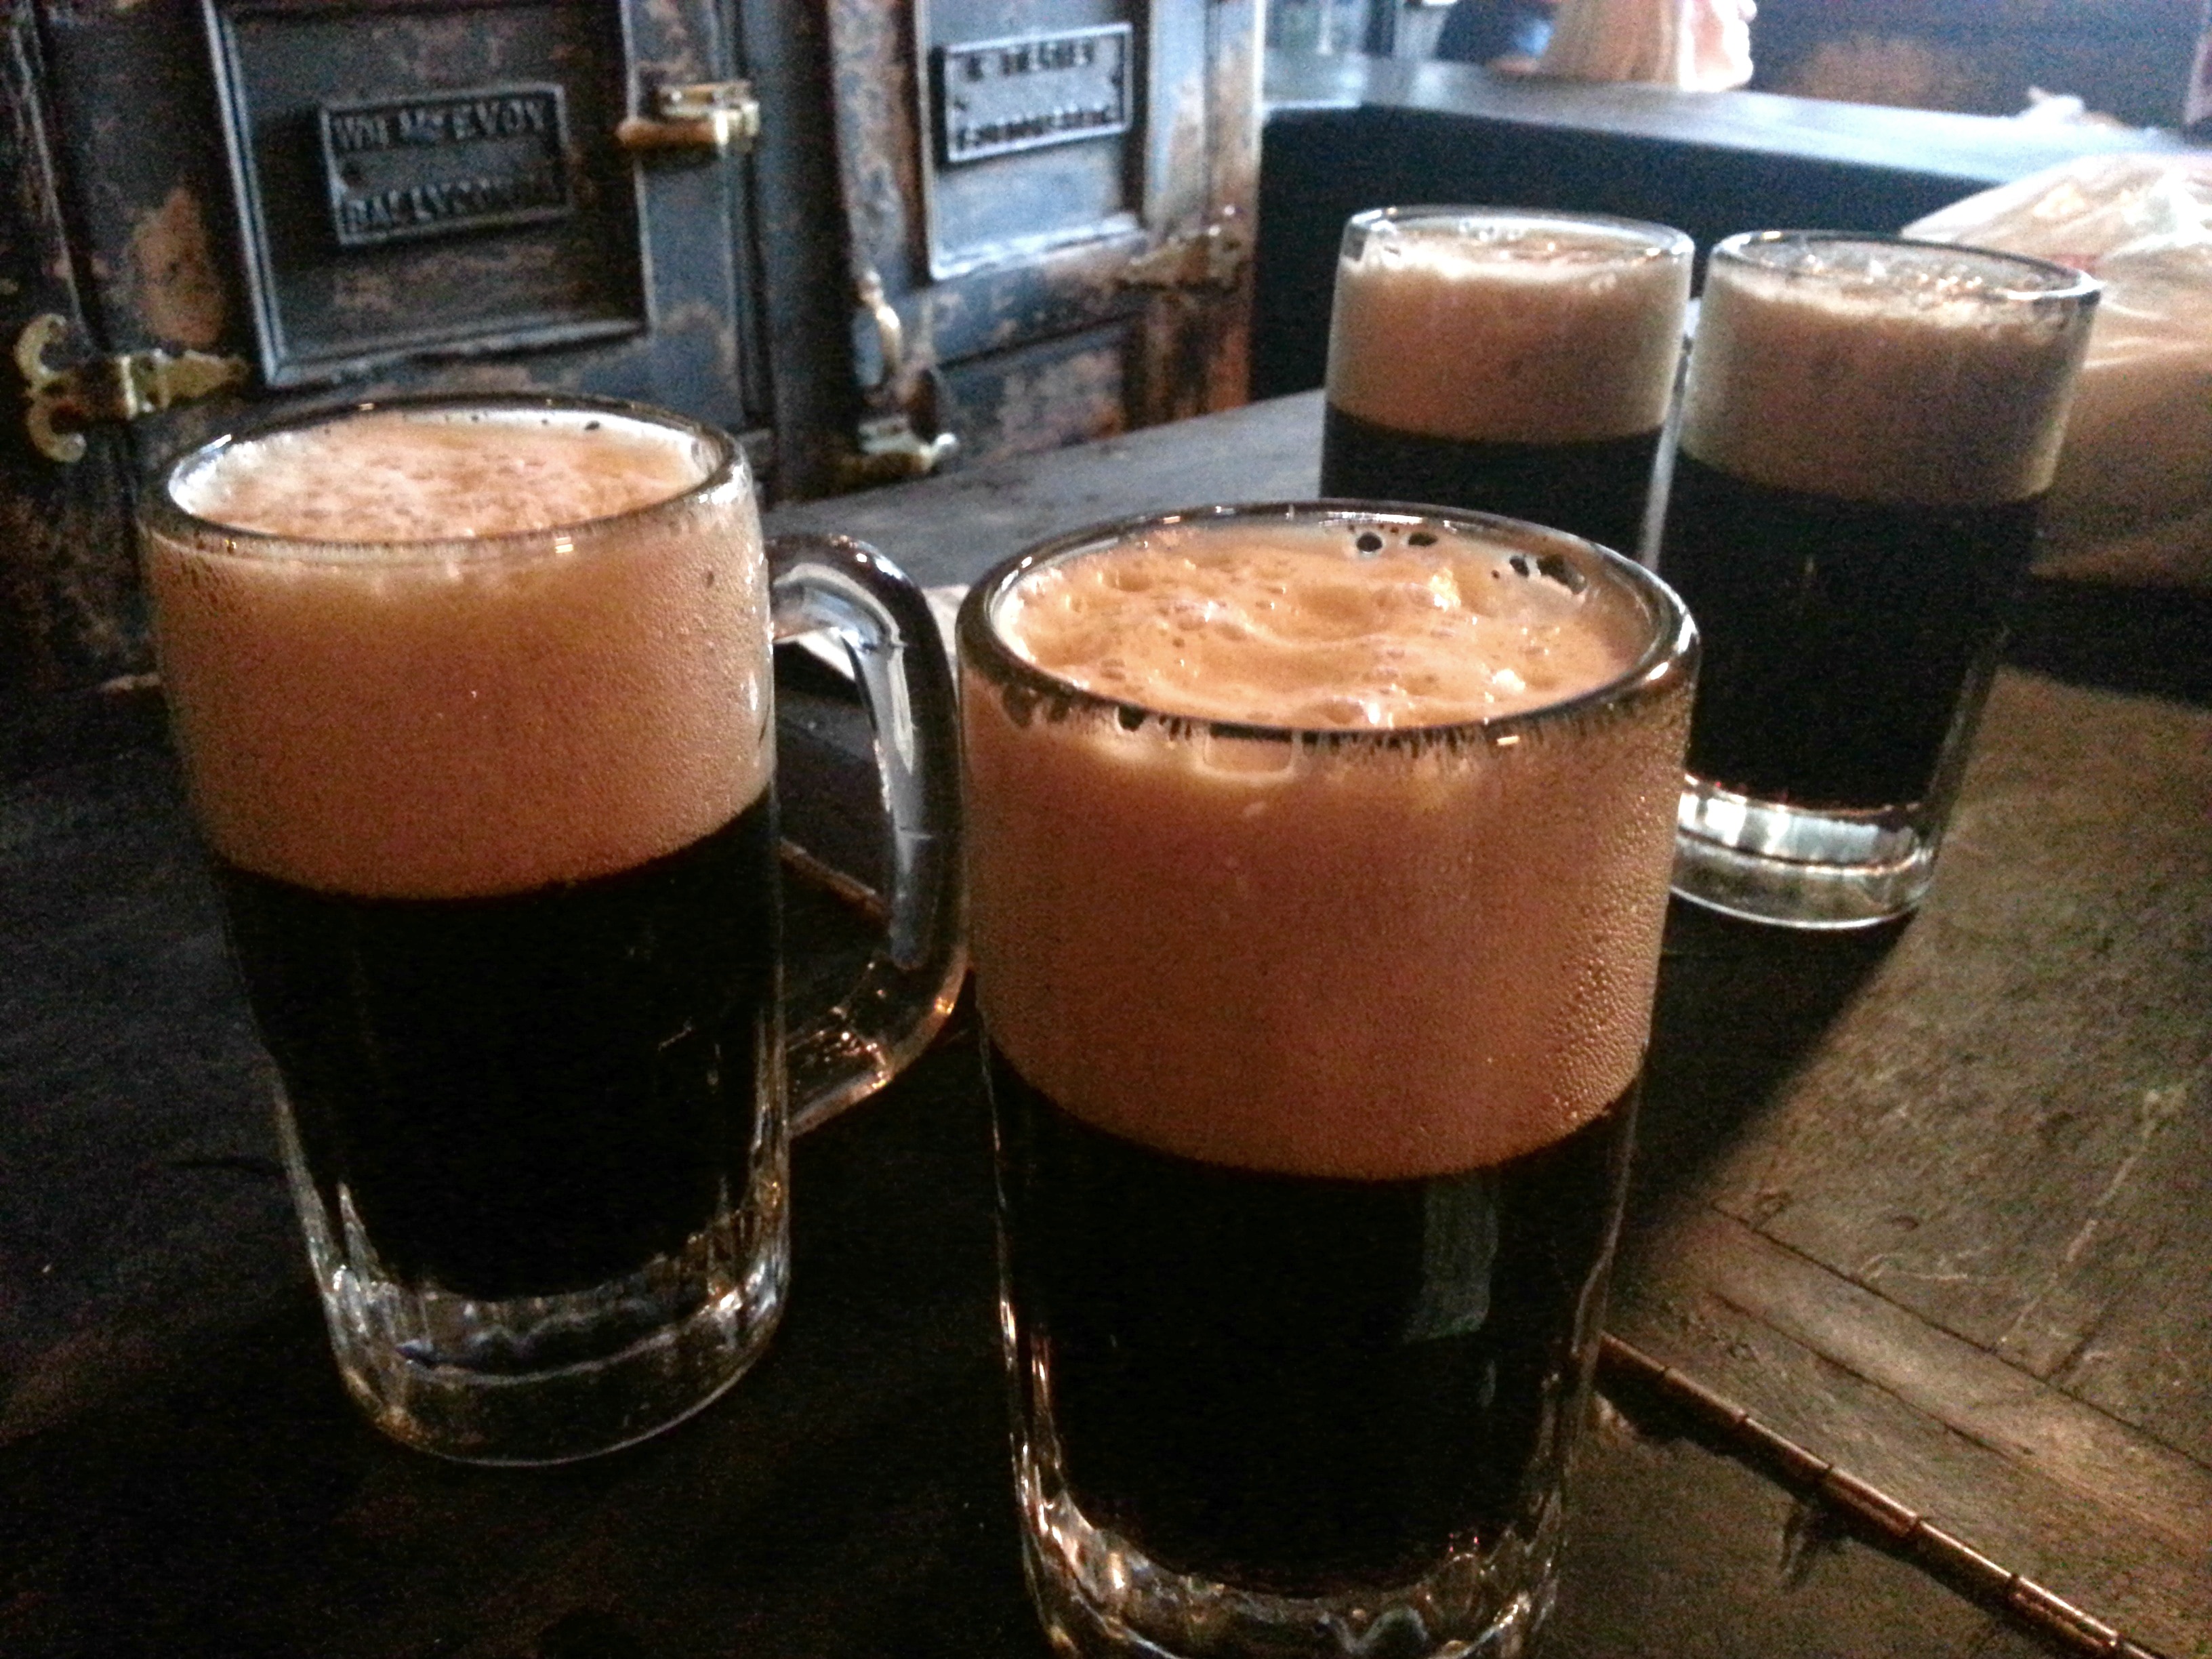 Two McSorley's Darks